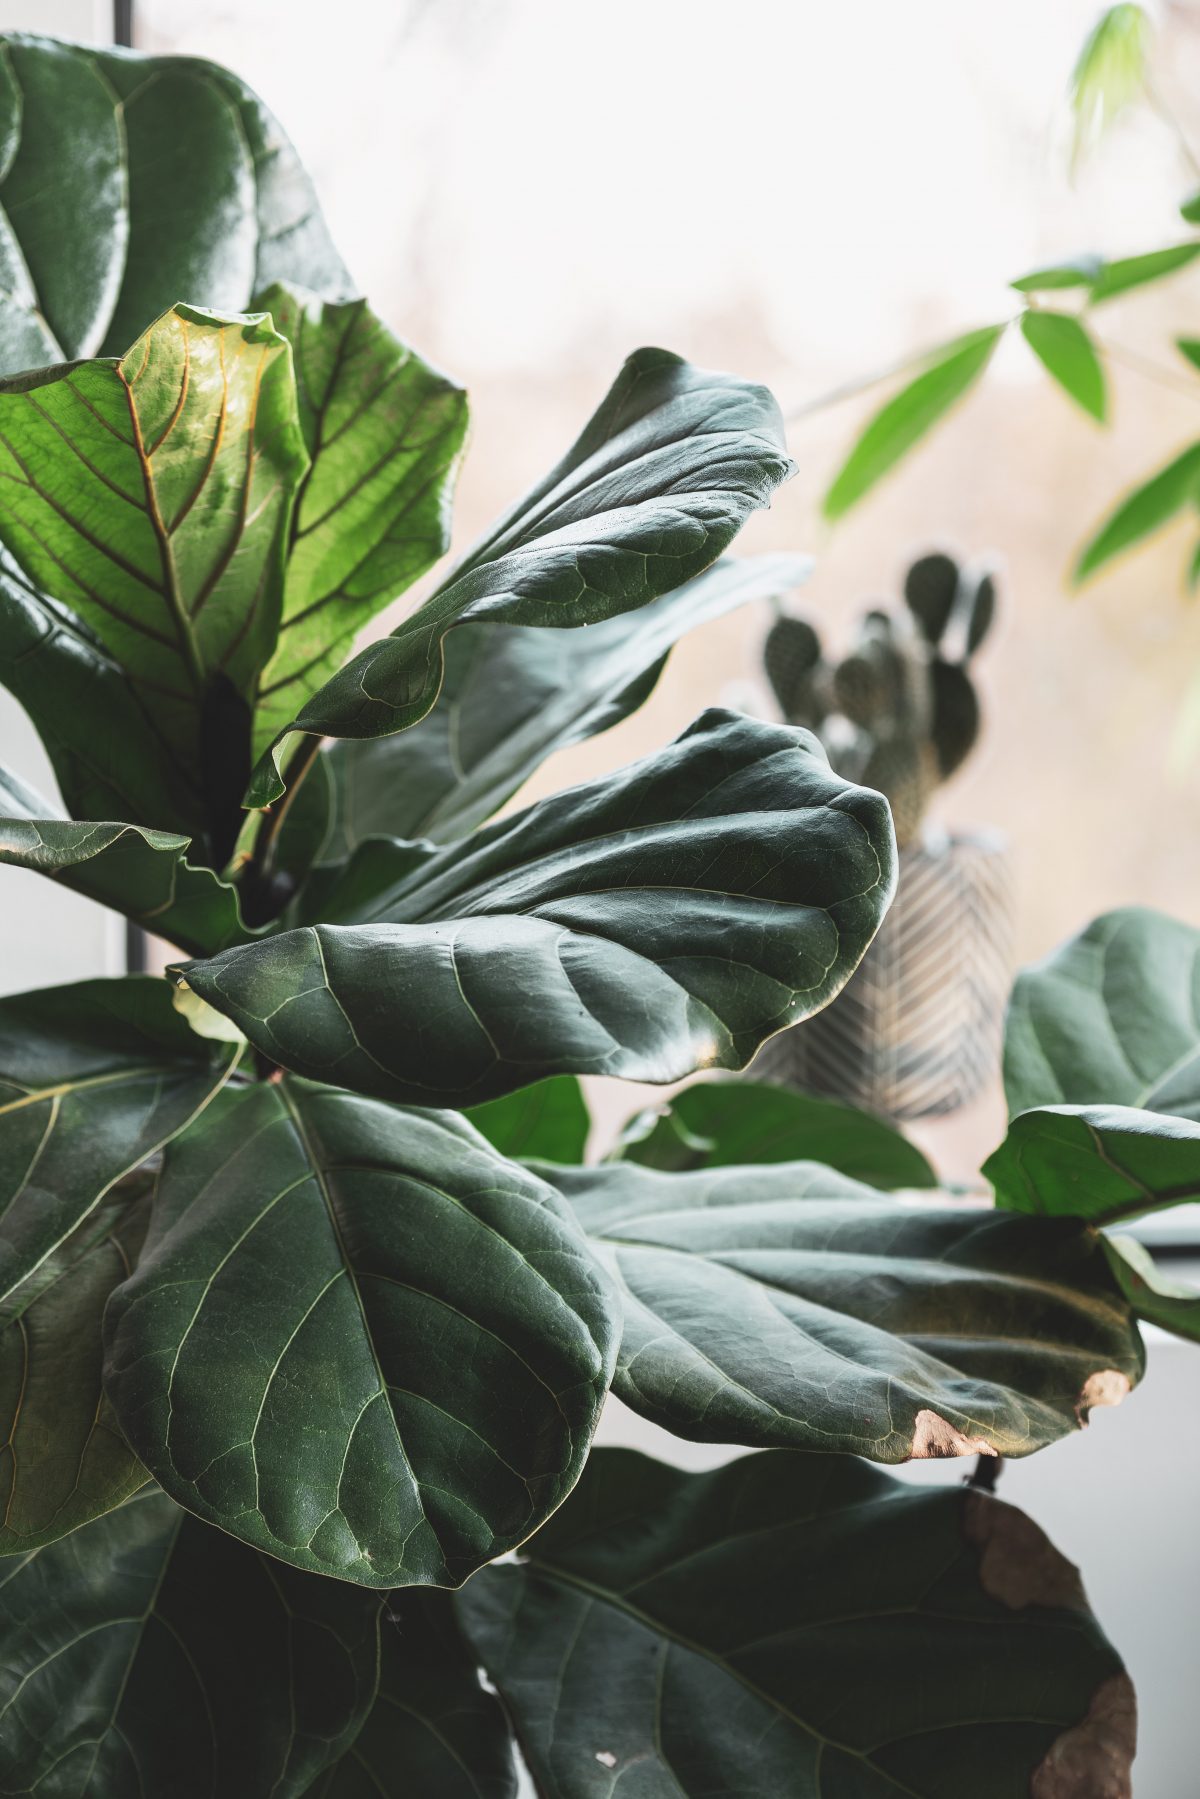 How to repot a fiddle leaf fig – 5 easy steps to follow so your plant will flourish